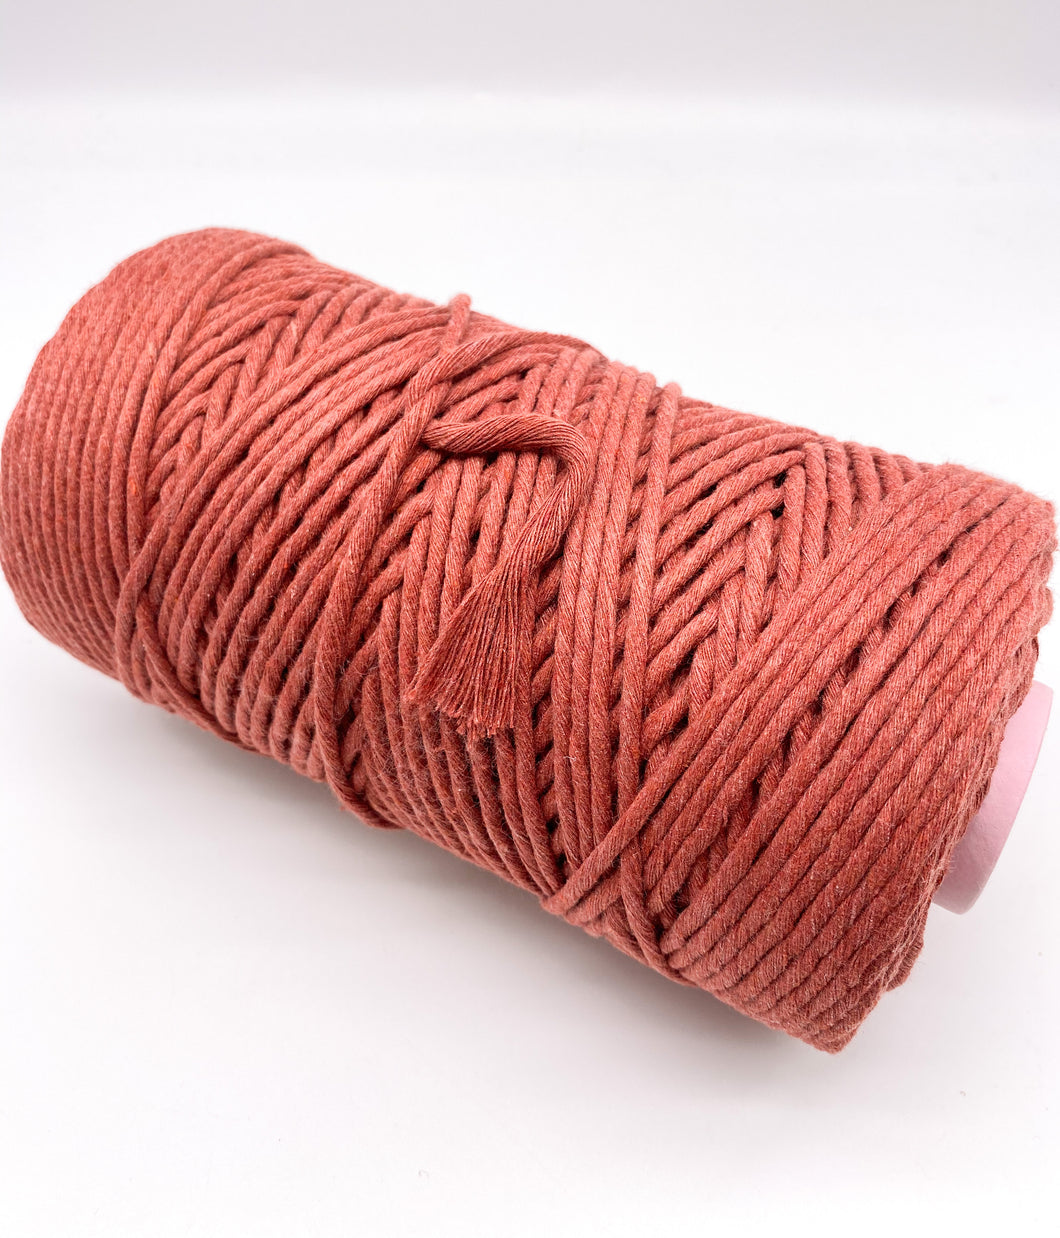 3mm RECYCLED single twist cotton string - 'MIDIS' - Clover Creations UK